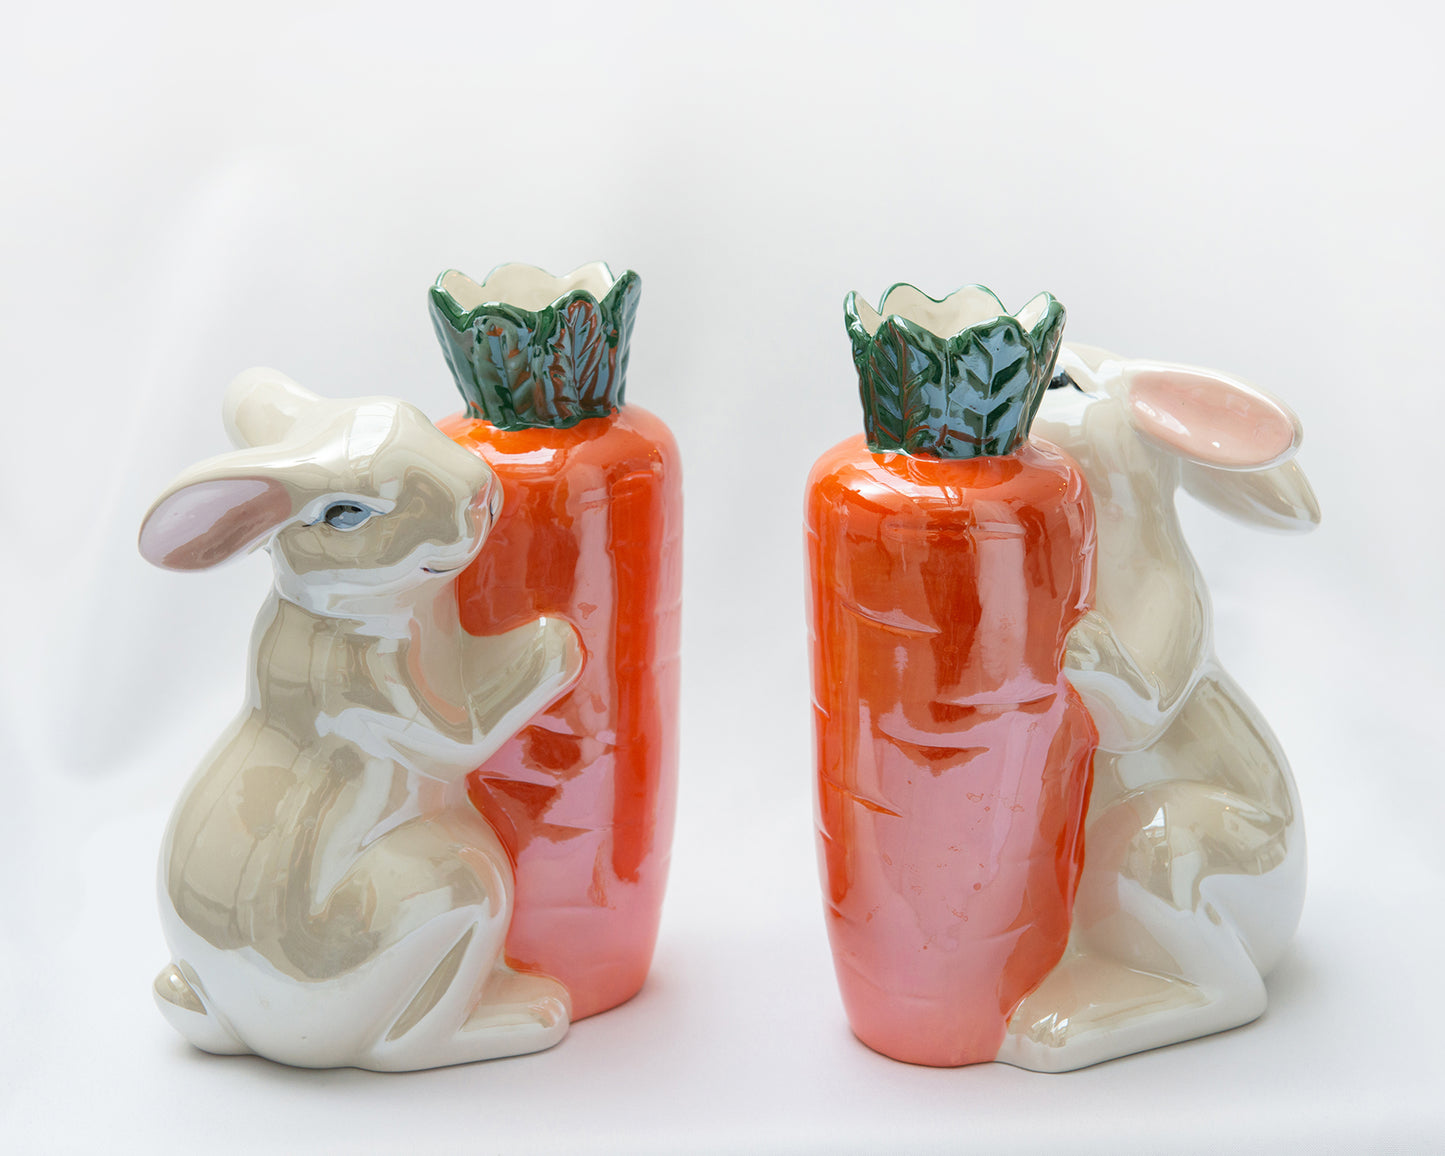 Bunny with Carrot Vase